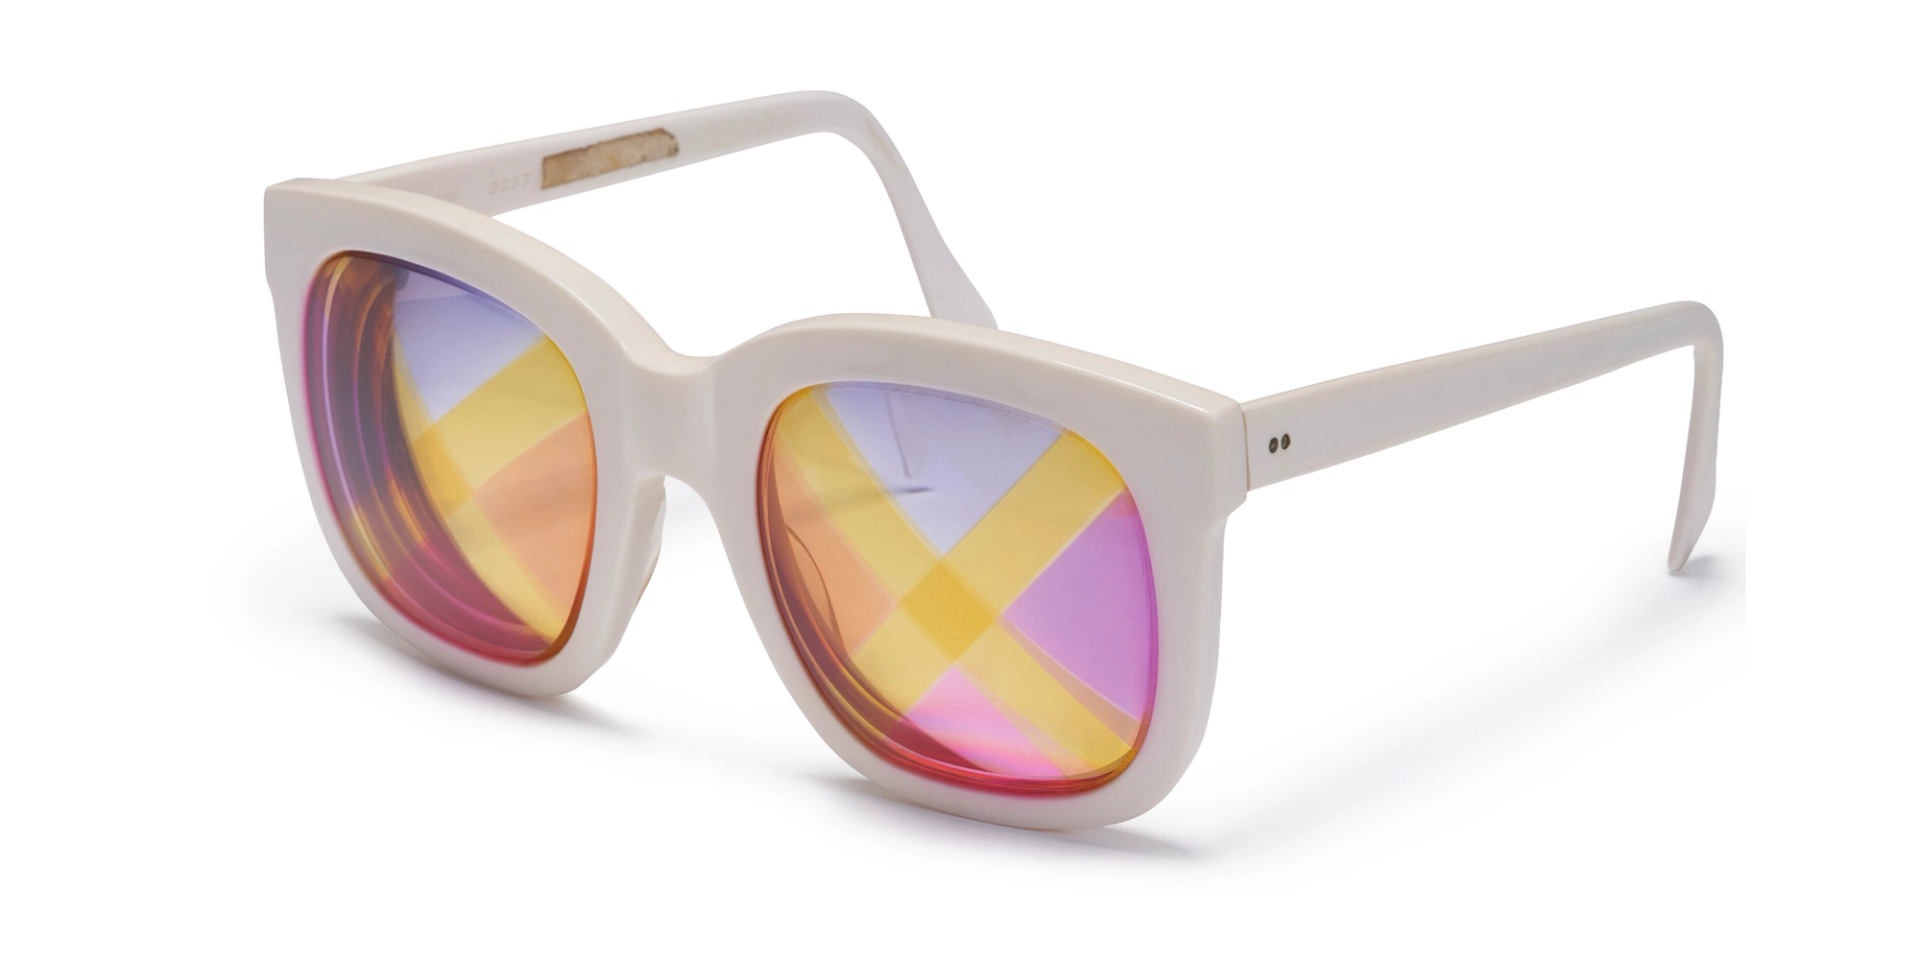 An image of a pair of sunglasses with white plastic frames, the lenses with yellow X's against purple, pink, and orange background